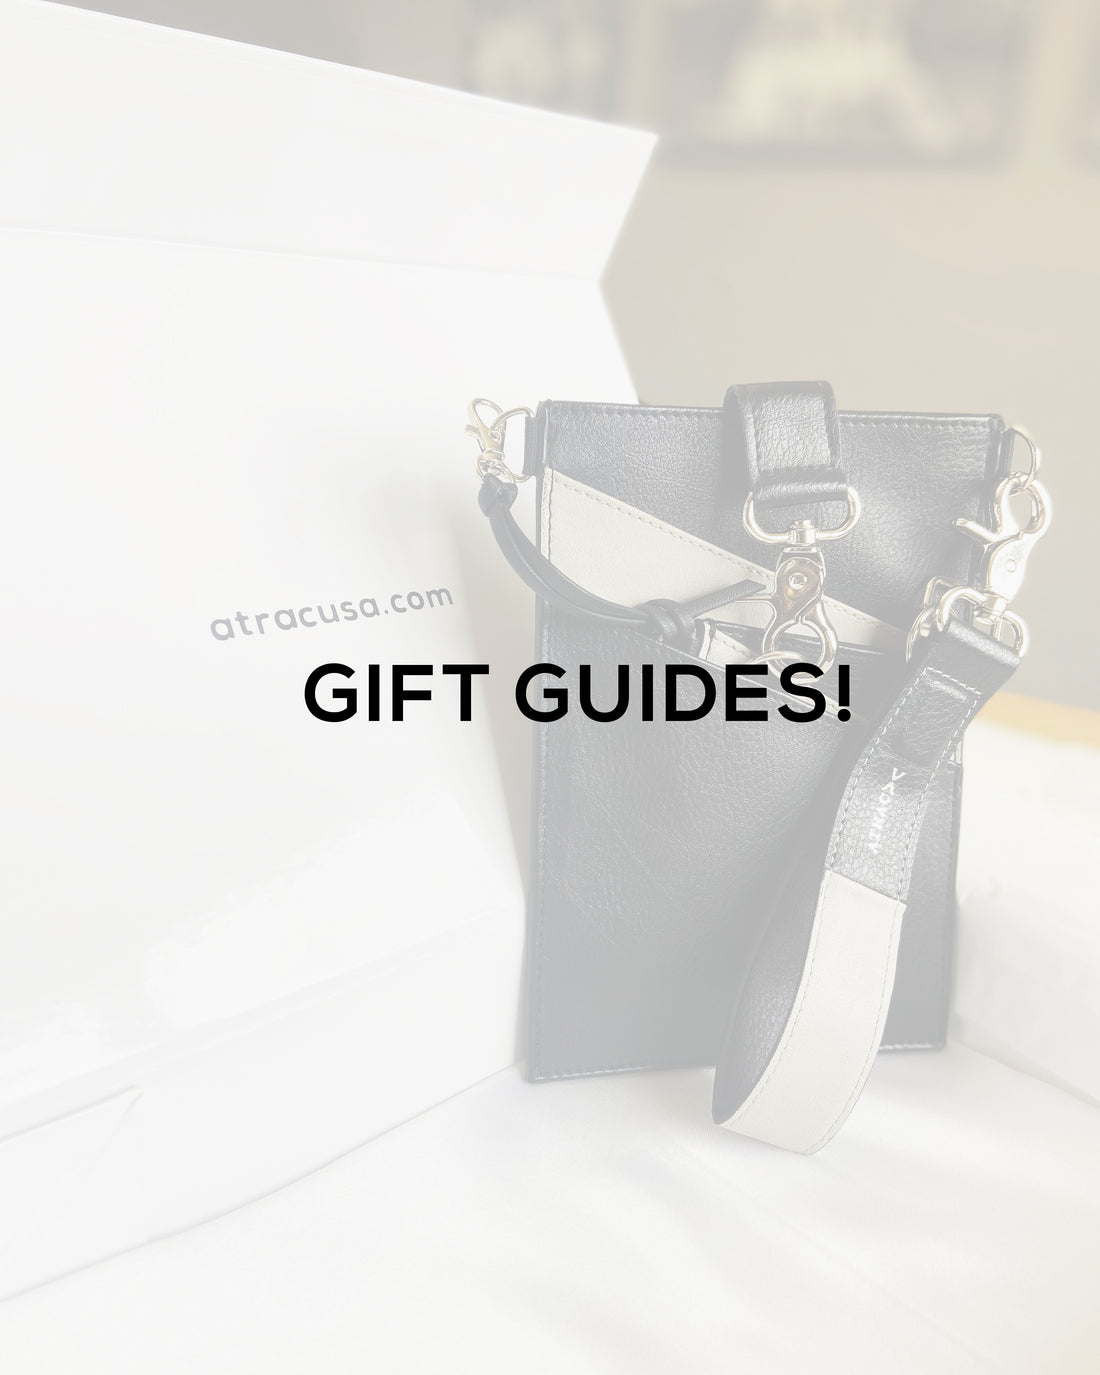 Gift guides!